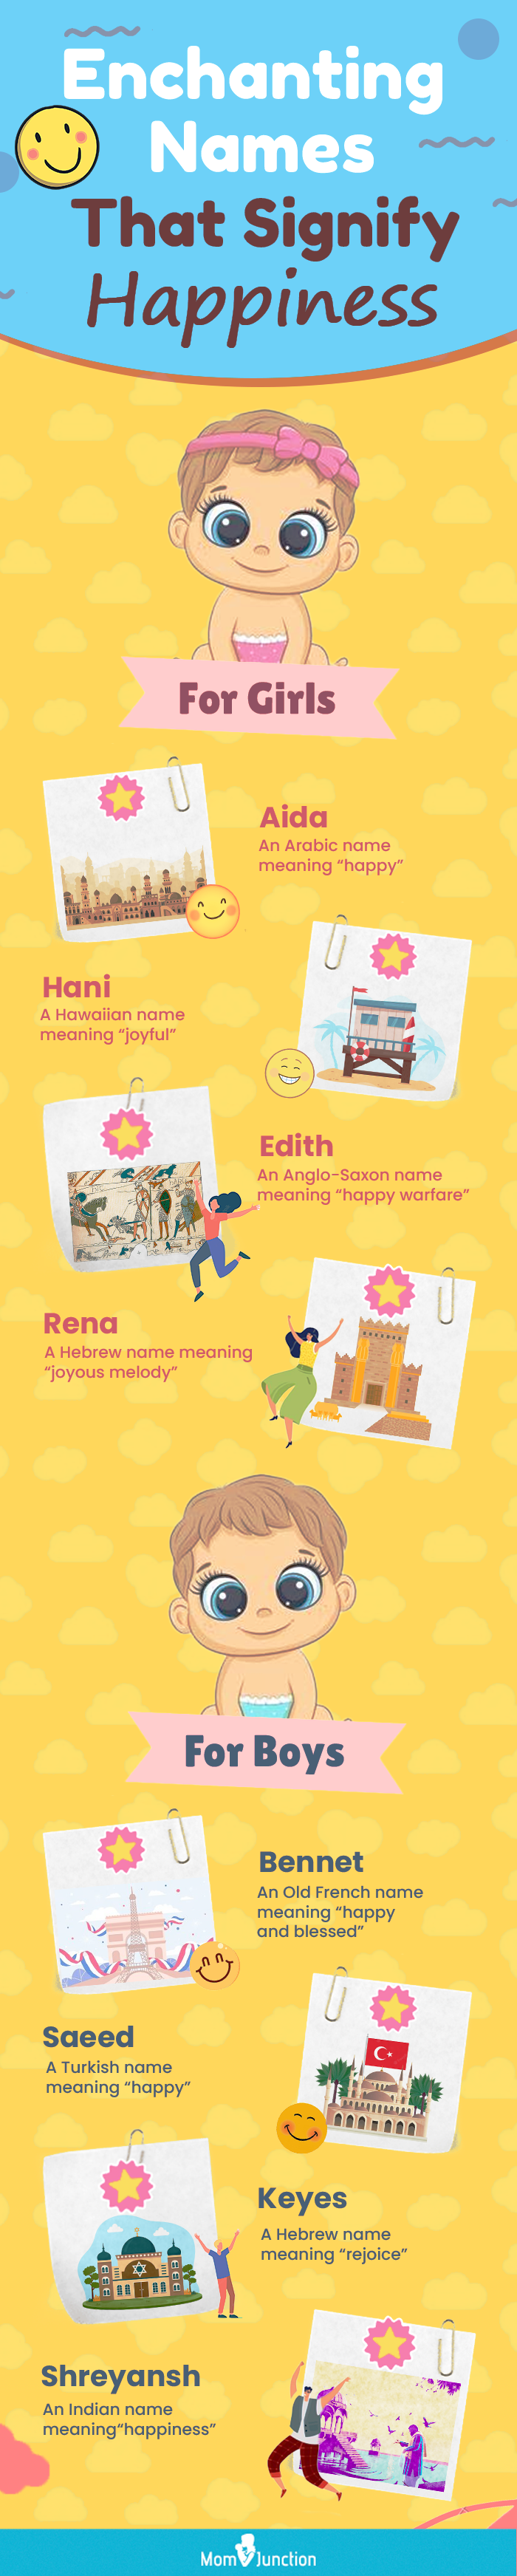 enchanting names that signify happiness.png (infographic)